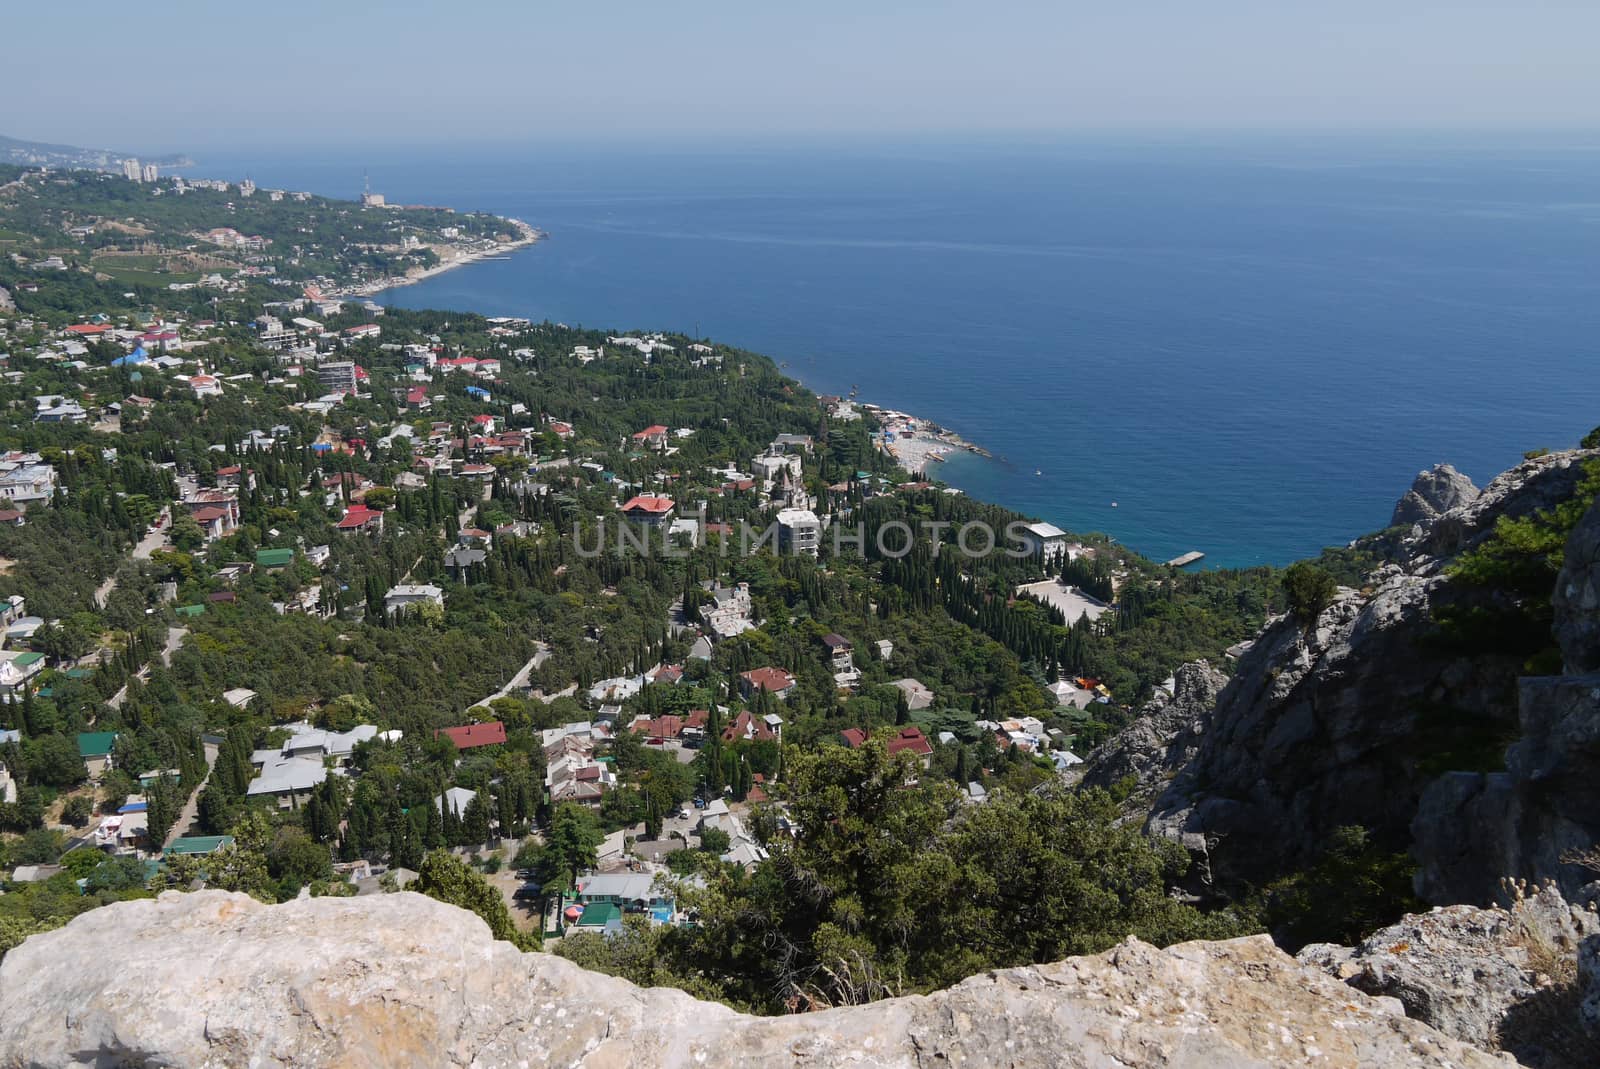 a small rock on the background of a beautiful quiet coastal town under a blue sky by Adamchuk